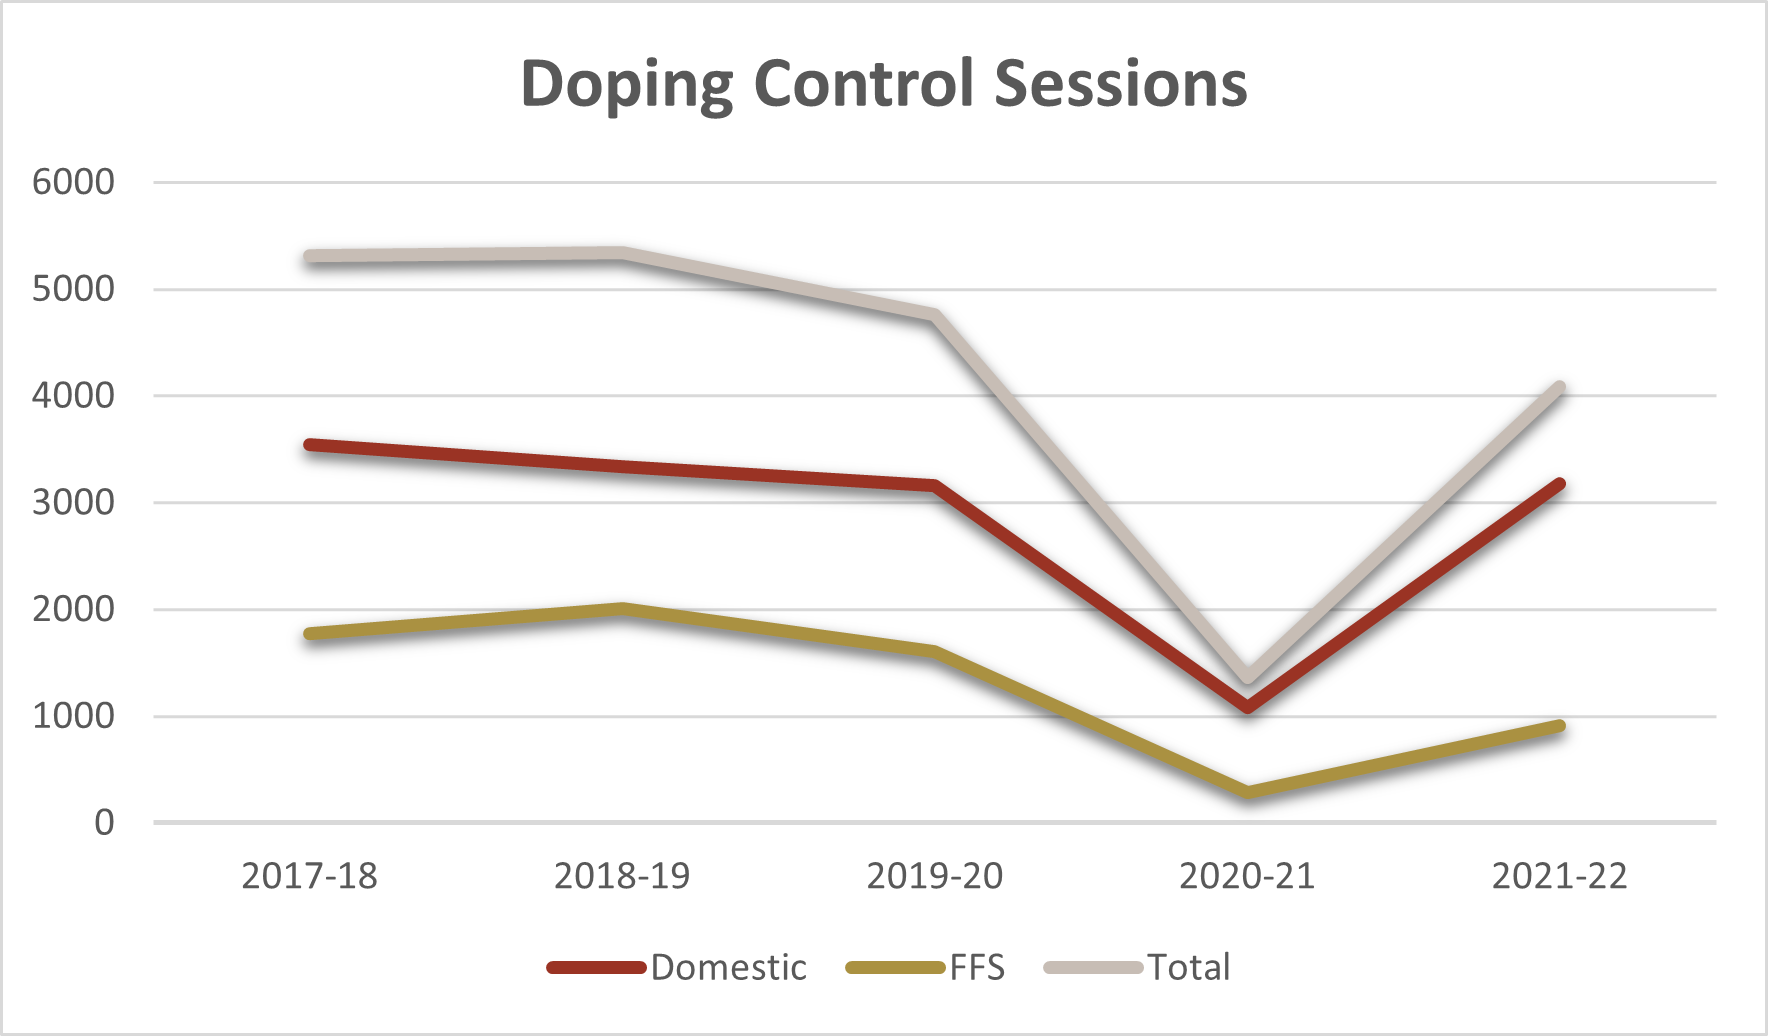 Doping control sessions